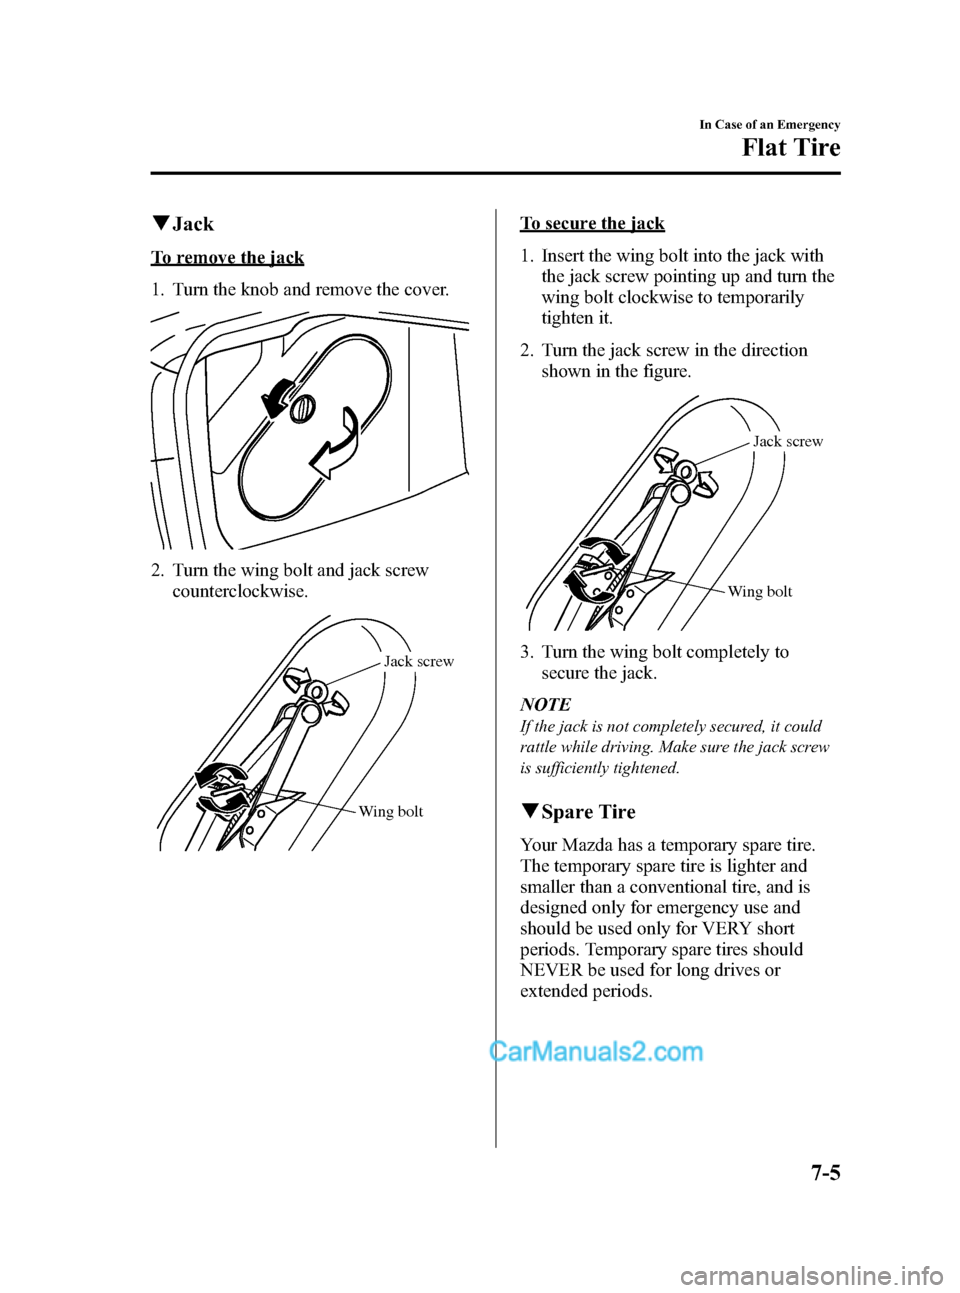 MAZDA MODEL MAZDASPEED 3 2008  Owners Manual (in English) Black plate (249,1)
qJack
To remove the jack
1. Turn the knob and remove the cover.
2. Turn the wing bolt and jack screw
counterclockwise.
Wing boltJack screw
To secure the jack
1. Insert the wing bol